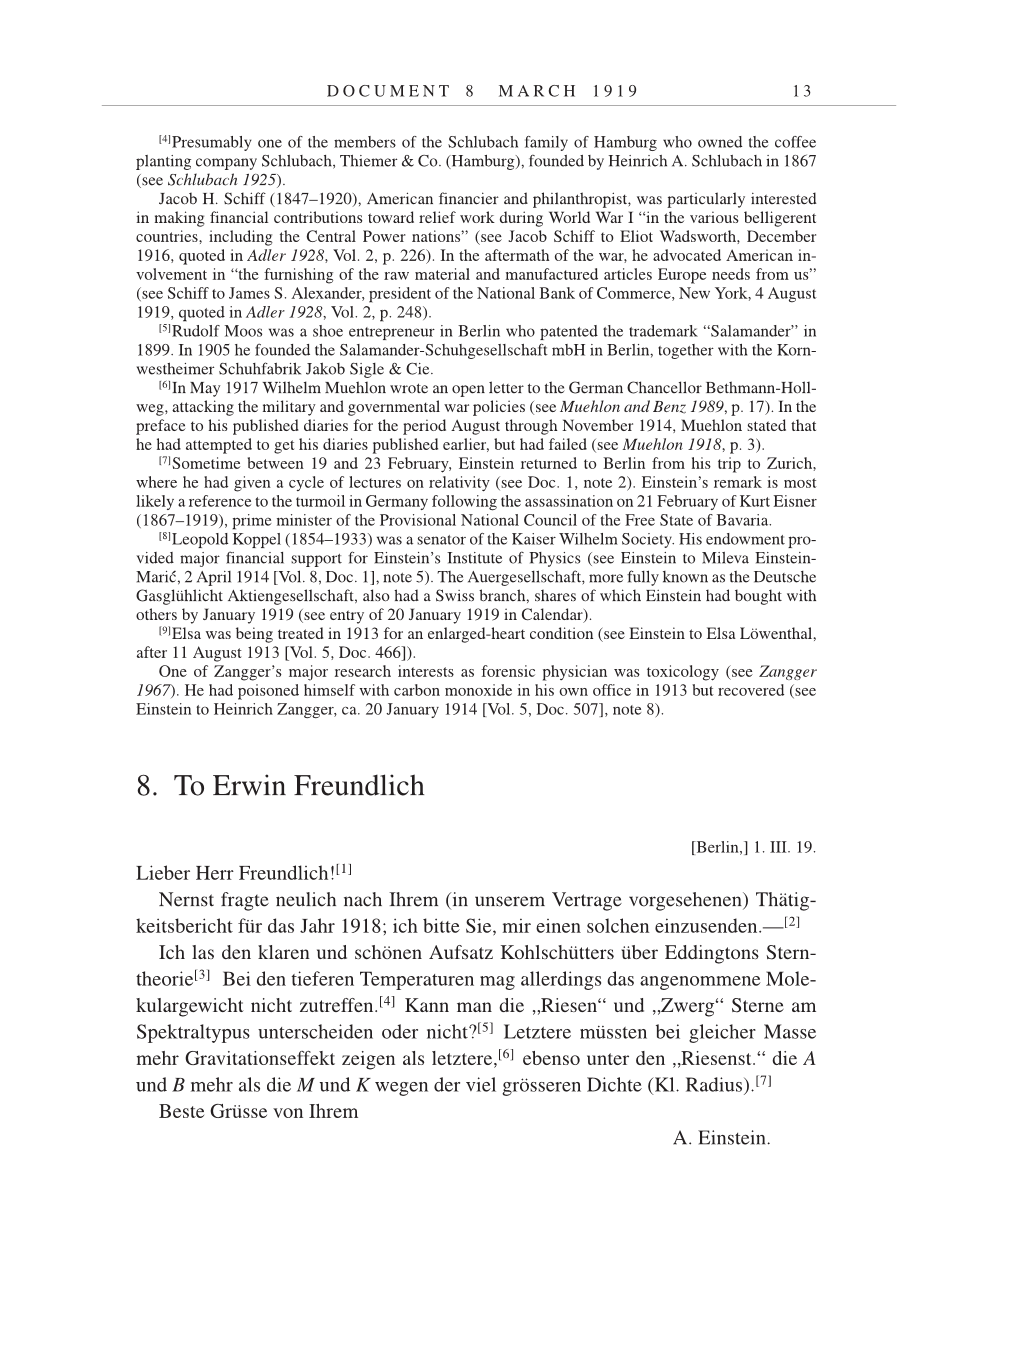 Volume 9: The Berlin Years: Correspondence January 1919-April 1920 page 13